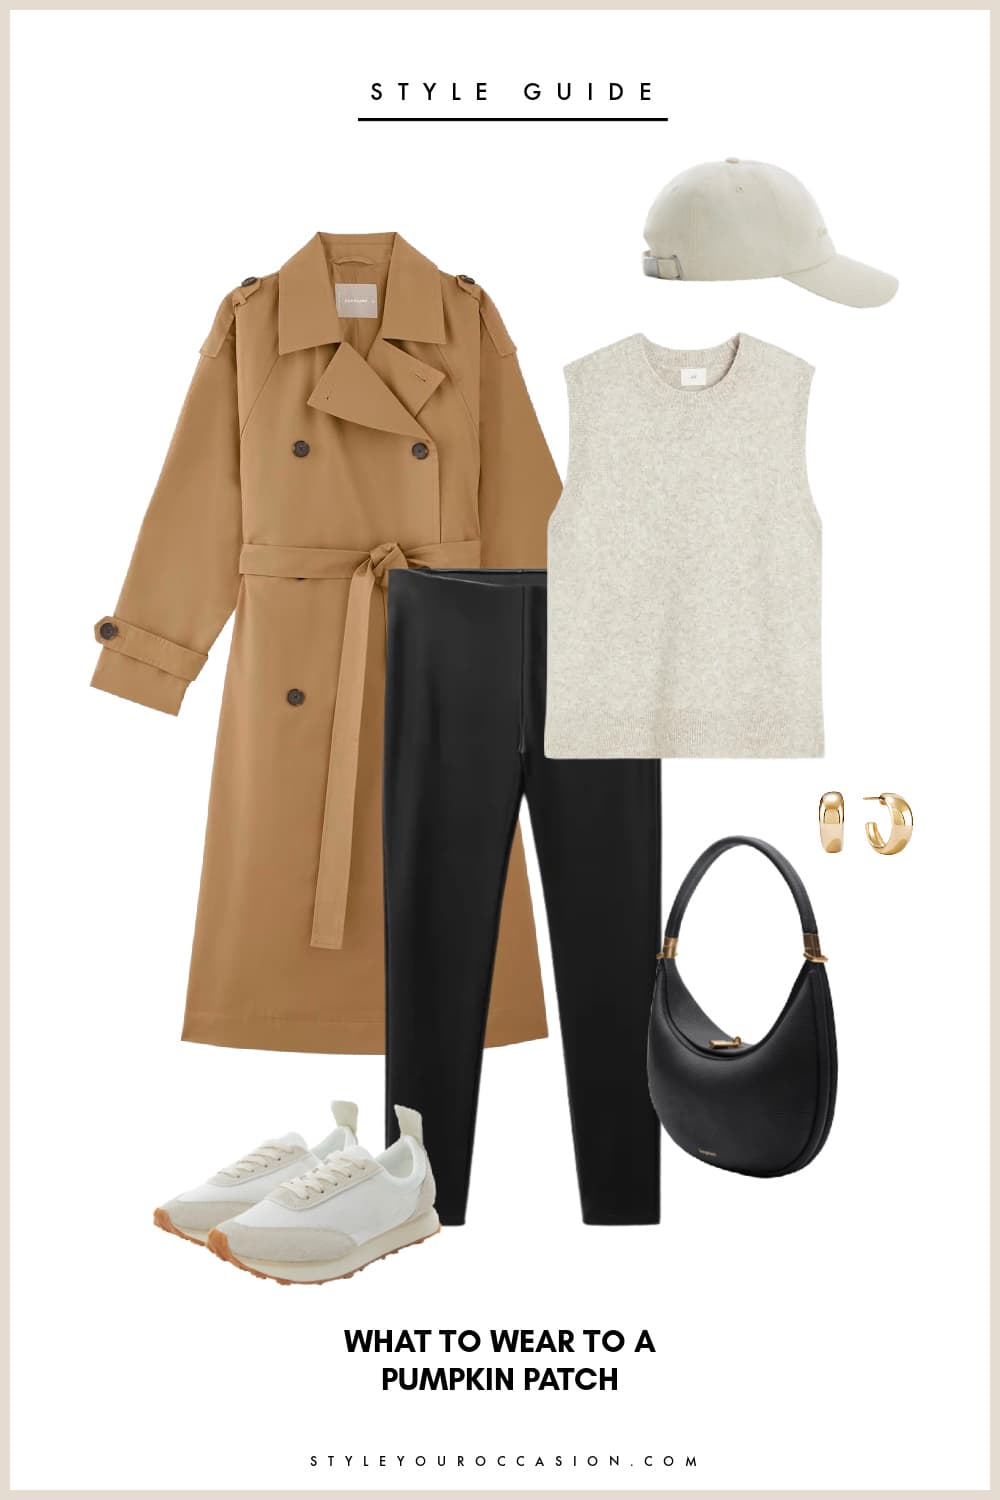 Flat lay graphic of leather leggings, cream tank top, white sneakers, camel colored trench coat, a black handbag, gold hoop earrings and a white baseball cap.